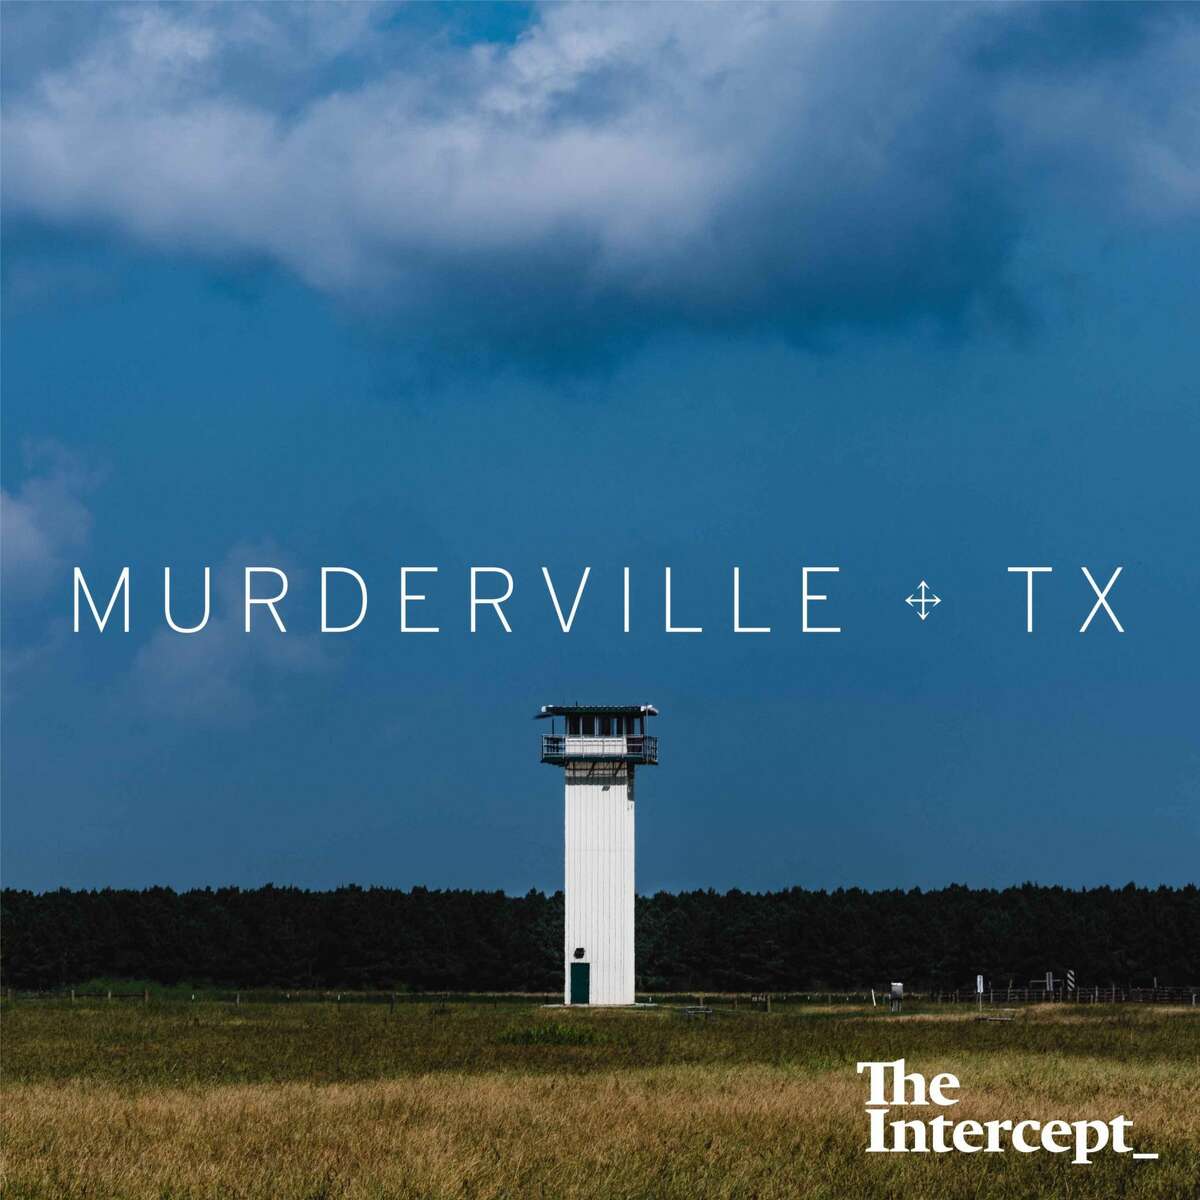 Throughout nine episodes, two journalists investigate the murder of a grandmother in Houston in 1992. Today, the man sentenced to death for the crime swears he is innocent.